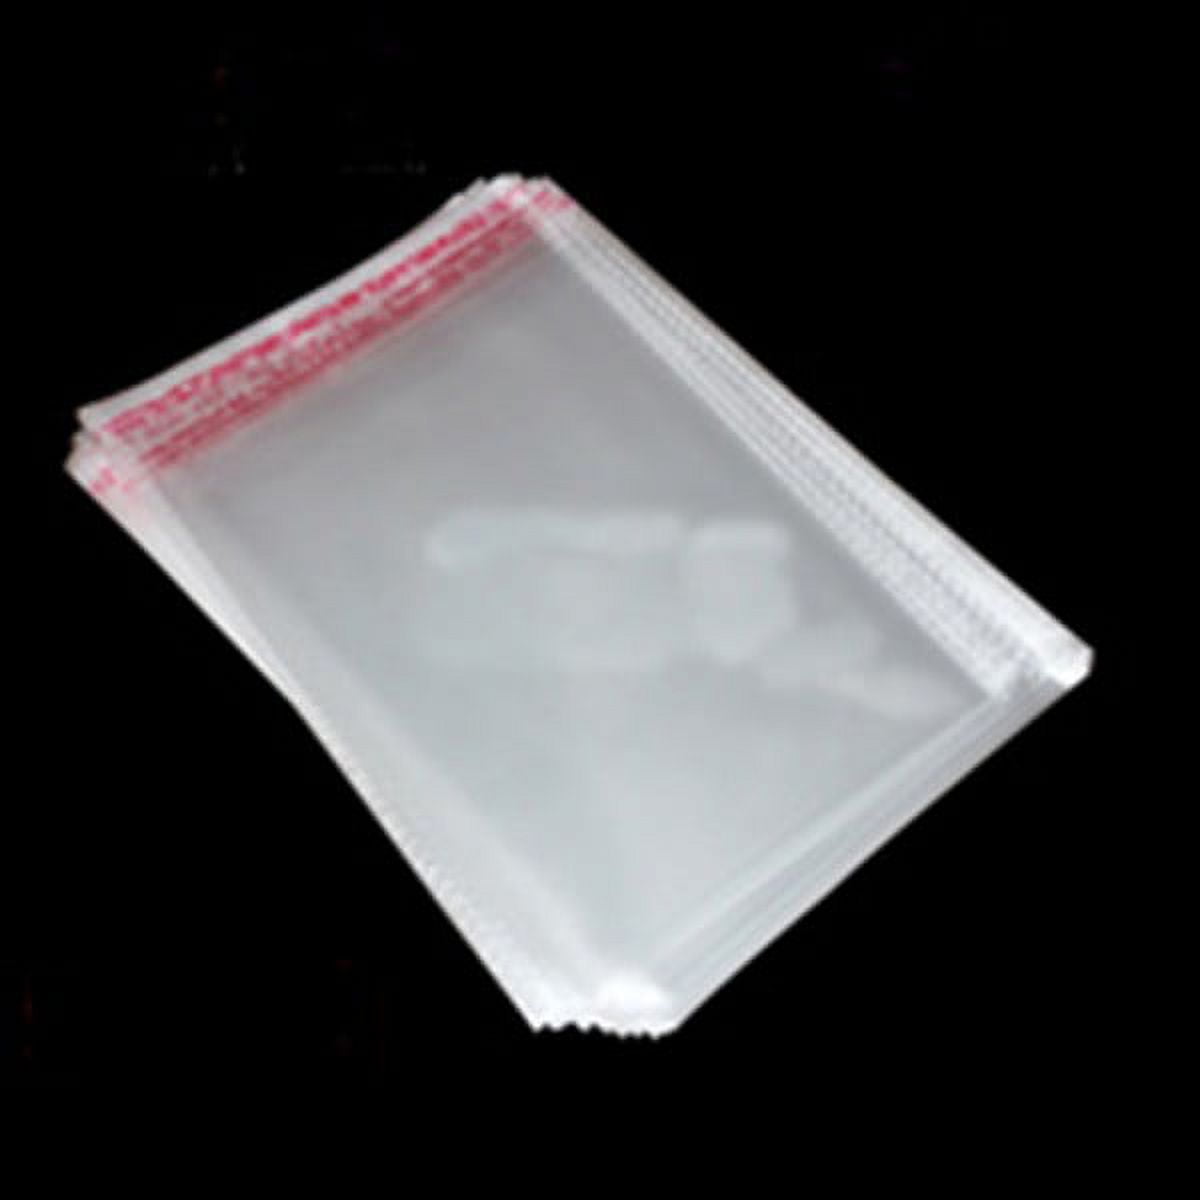 50x Clear Self Adhesive Seal Plastic Bags for Jewelry Packaging